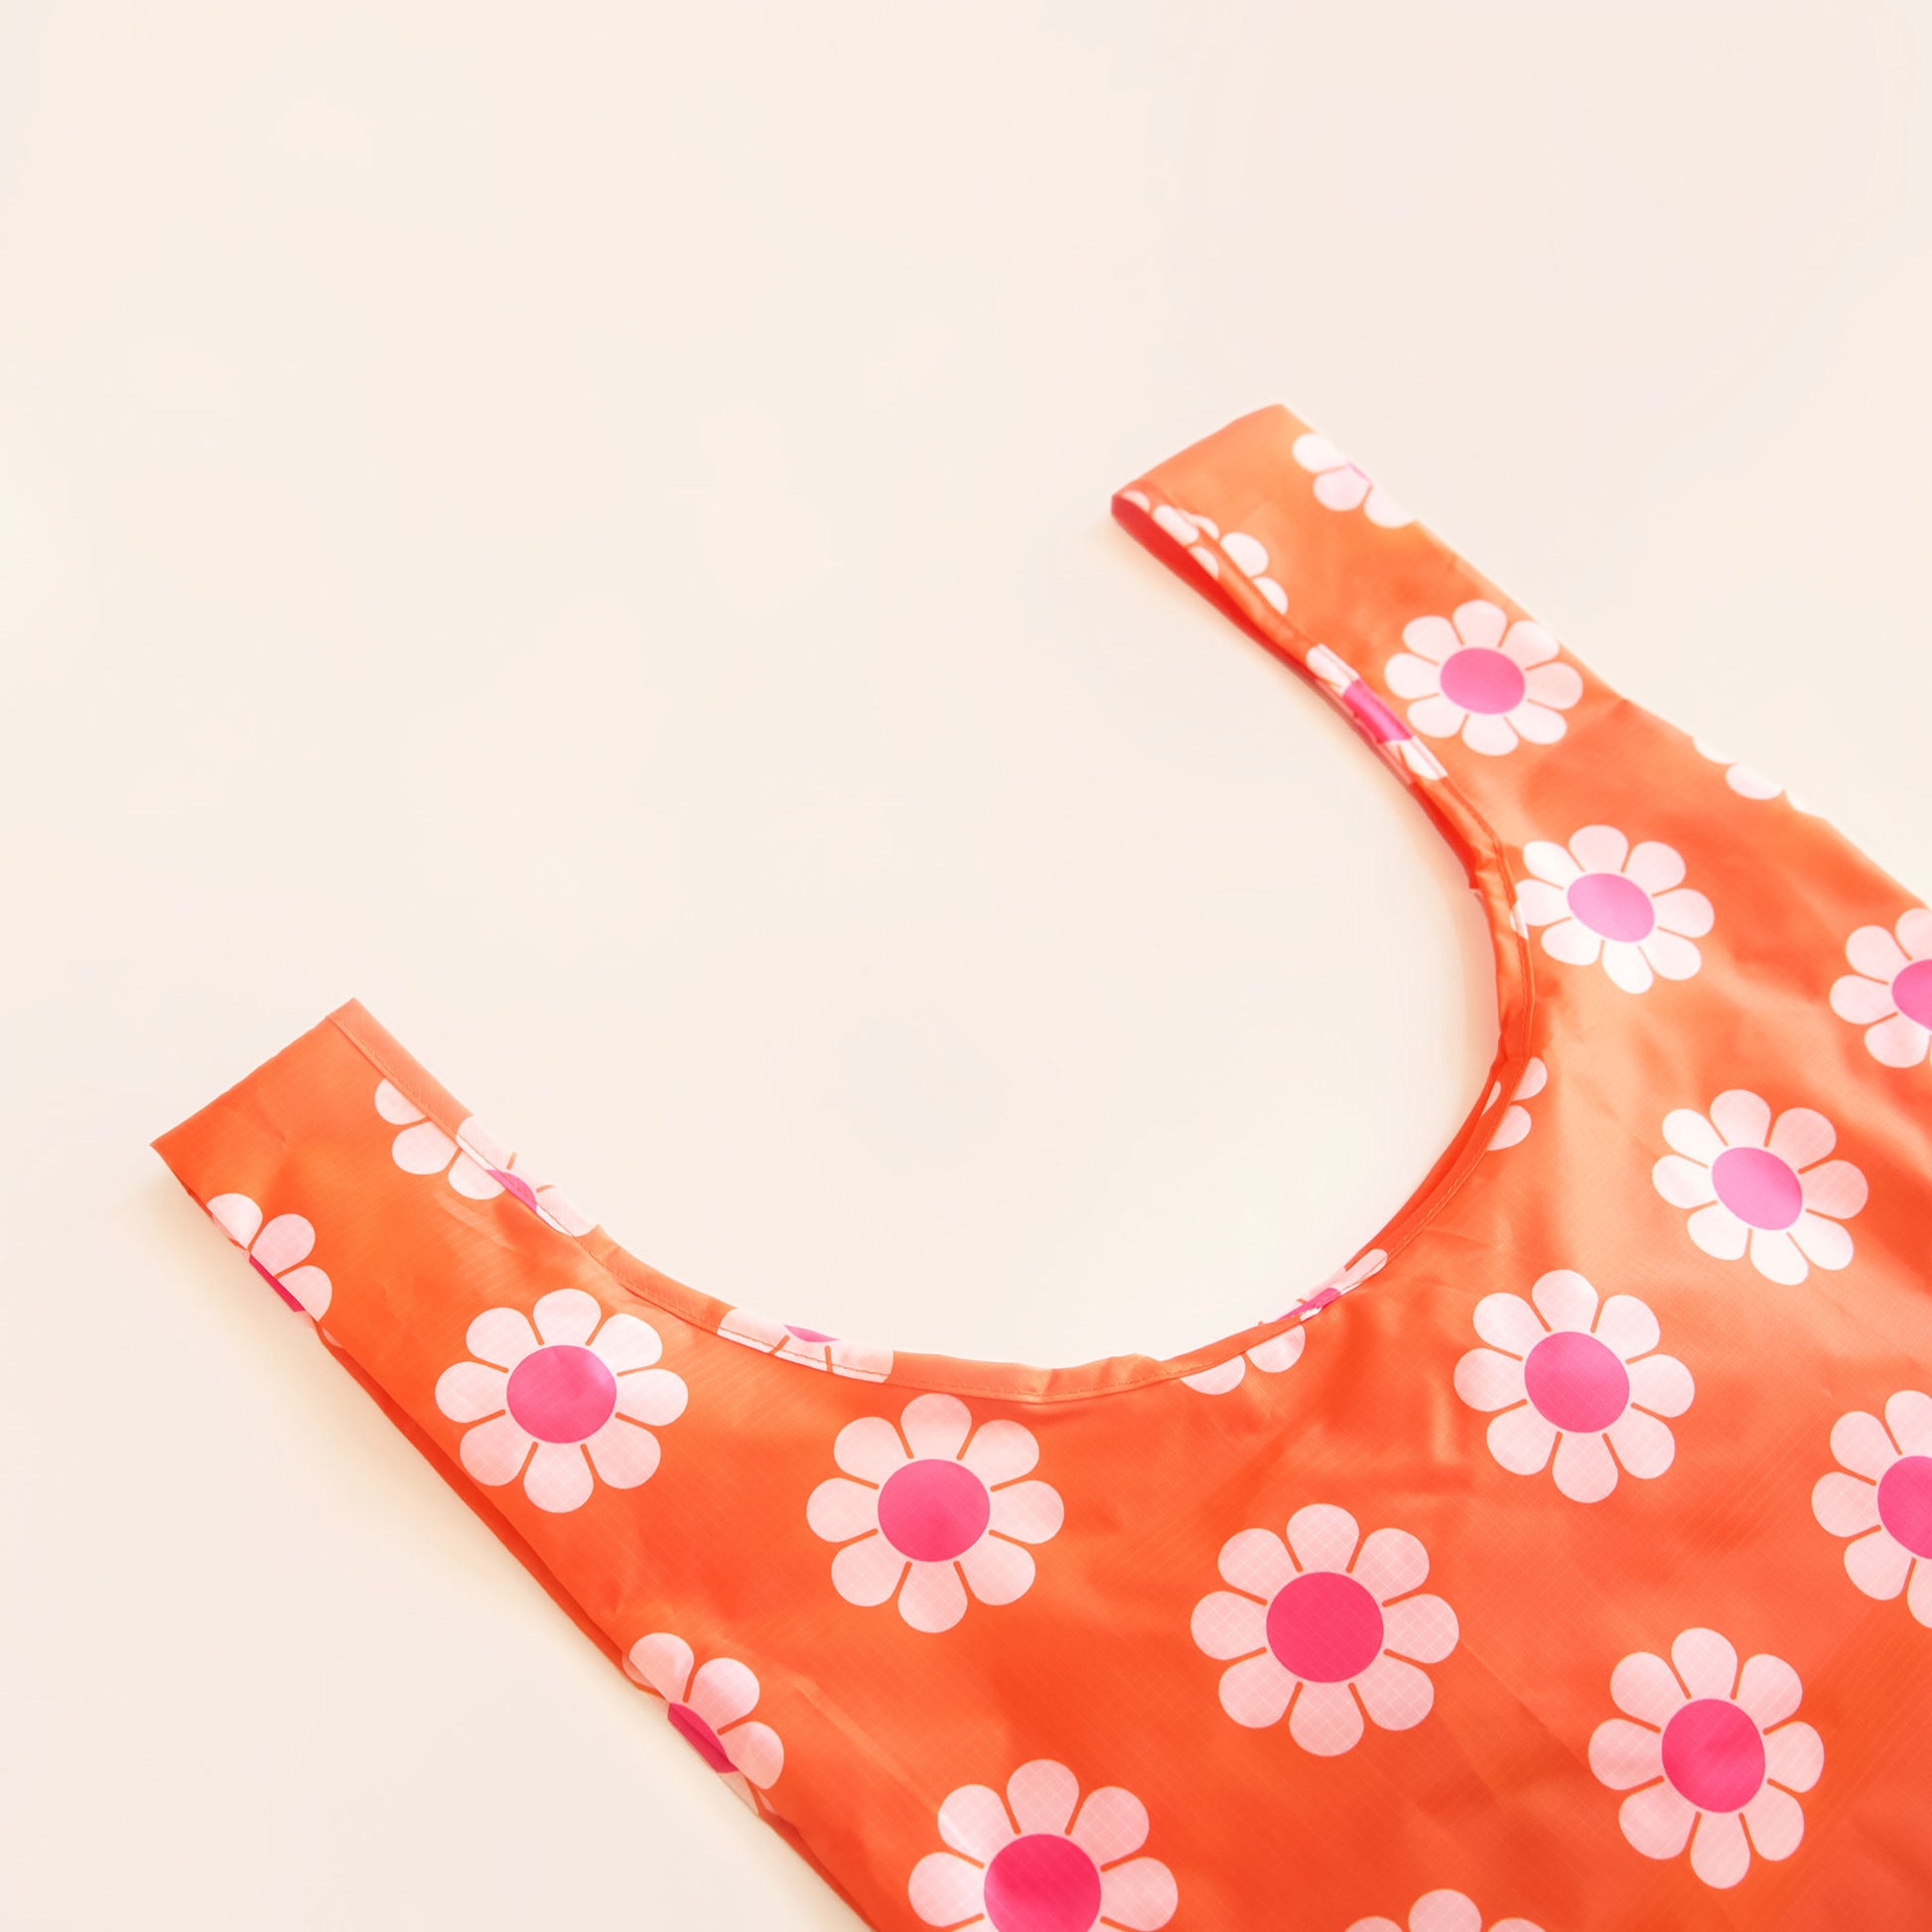 Red-orange reusable bag covered in a print of simple flowers with white petals and pink centers. The bag is positioned flat on a table and has a 'U' shape between two handles.